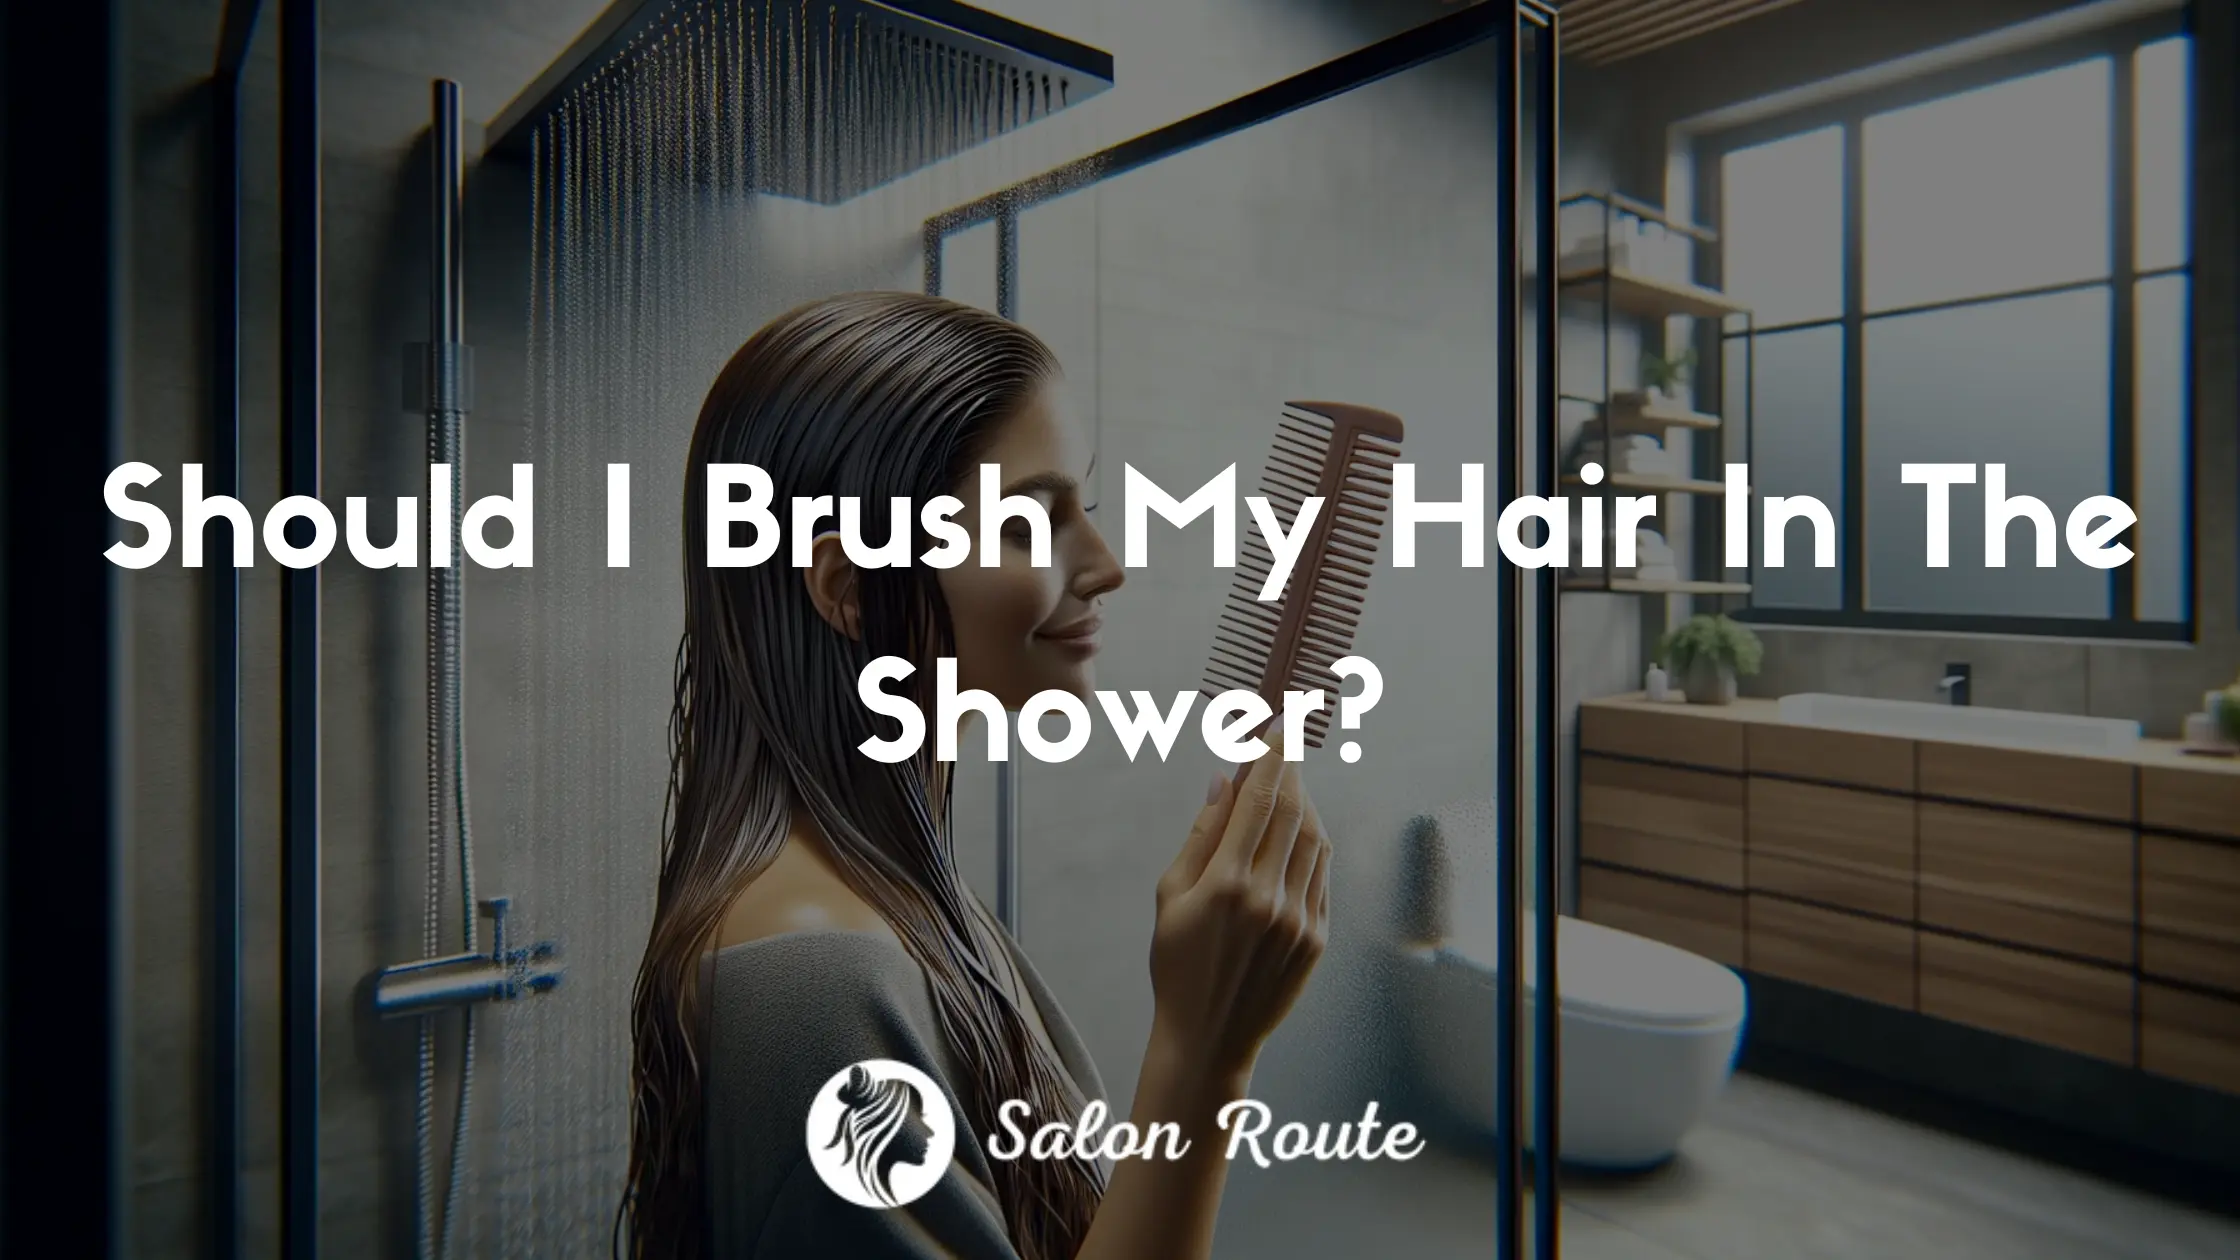 Should I Brush My Hair In The Shower?